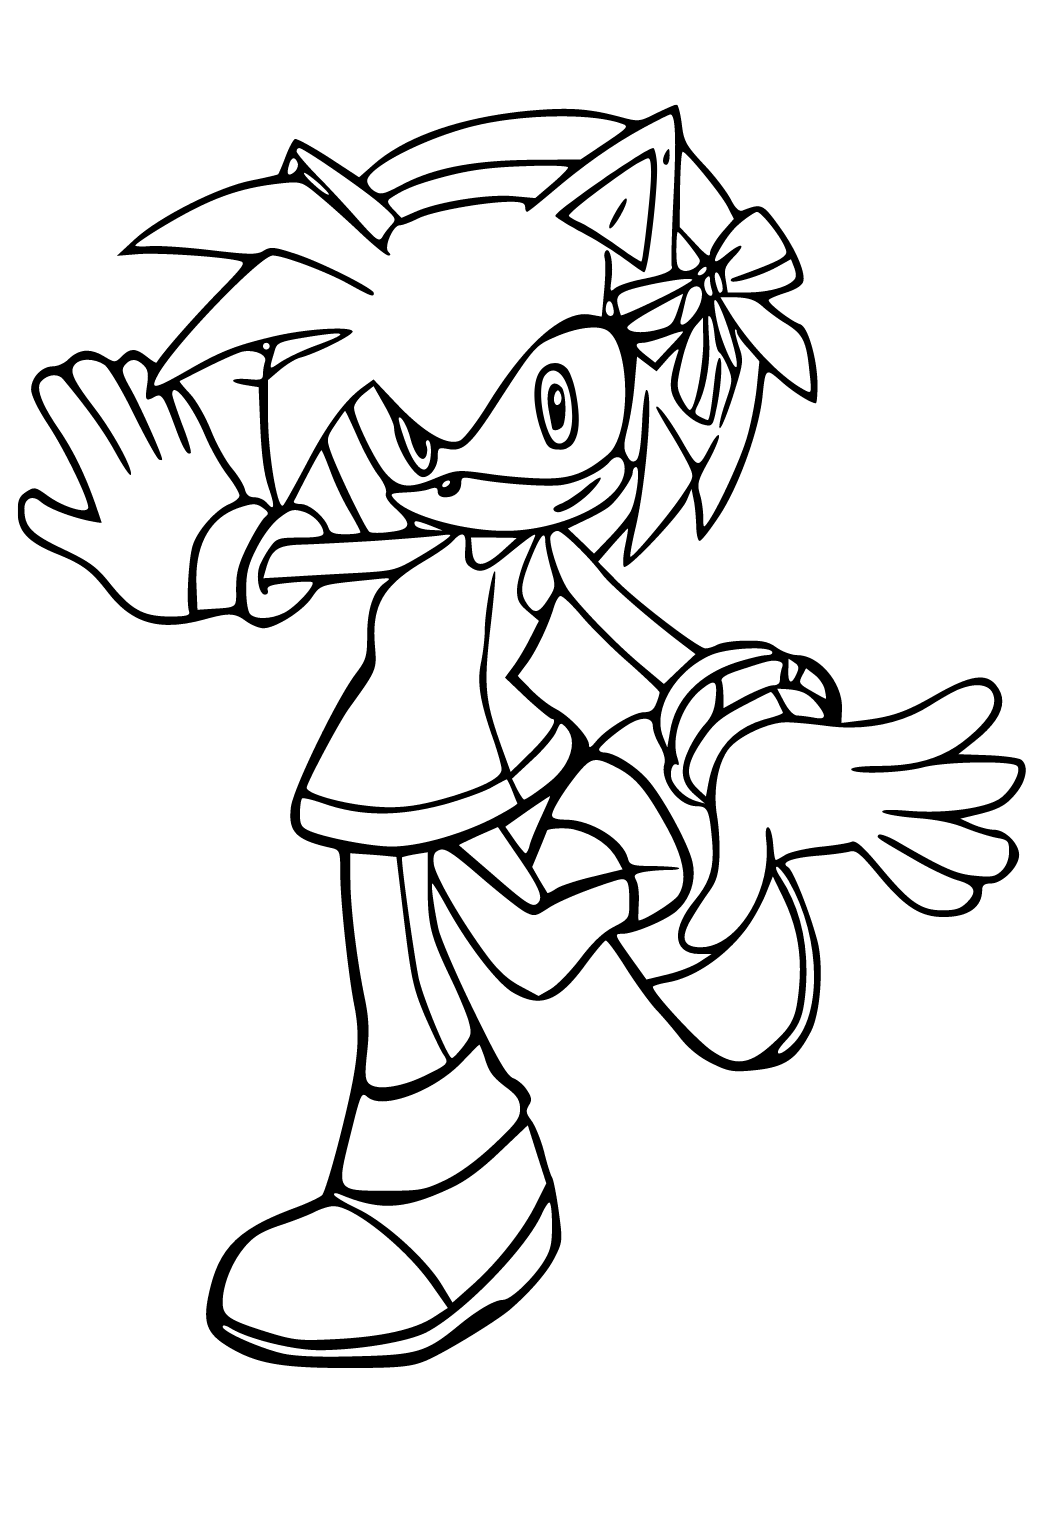 Free Printable Sonic Amy Dance Coloring Page, Sheet and Picture for Adults  and Kids (Girls and Boys) - Babeled.com